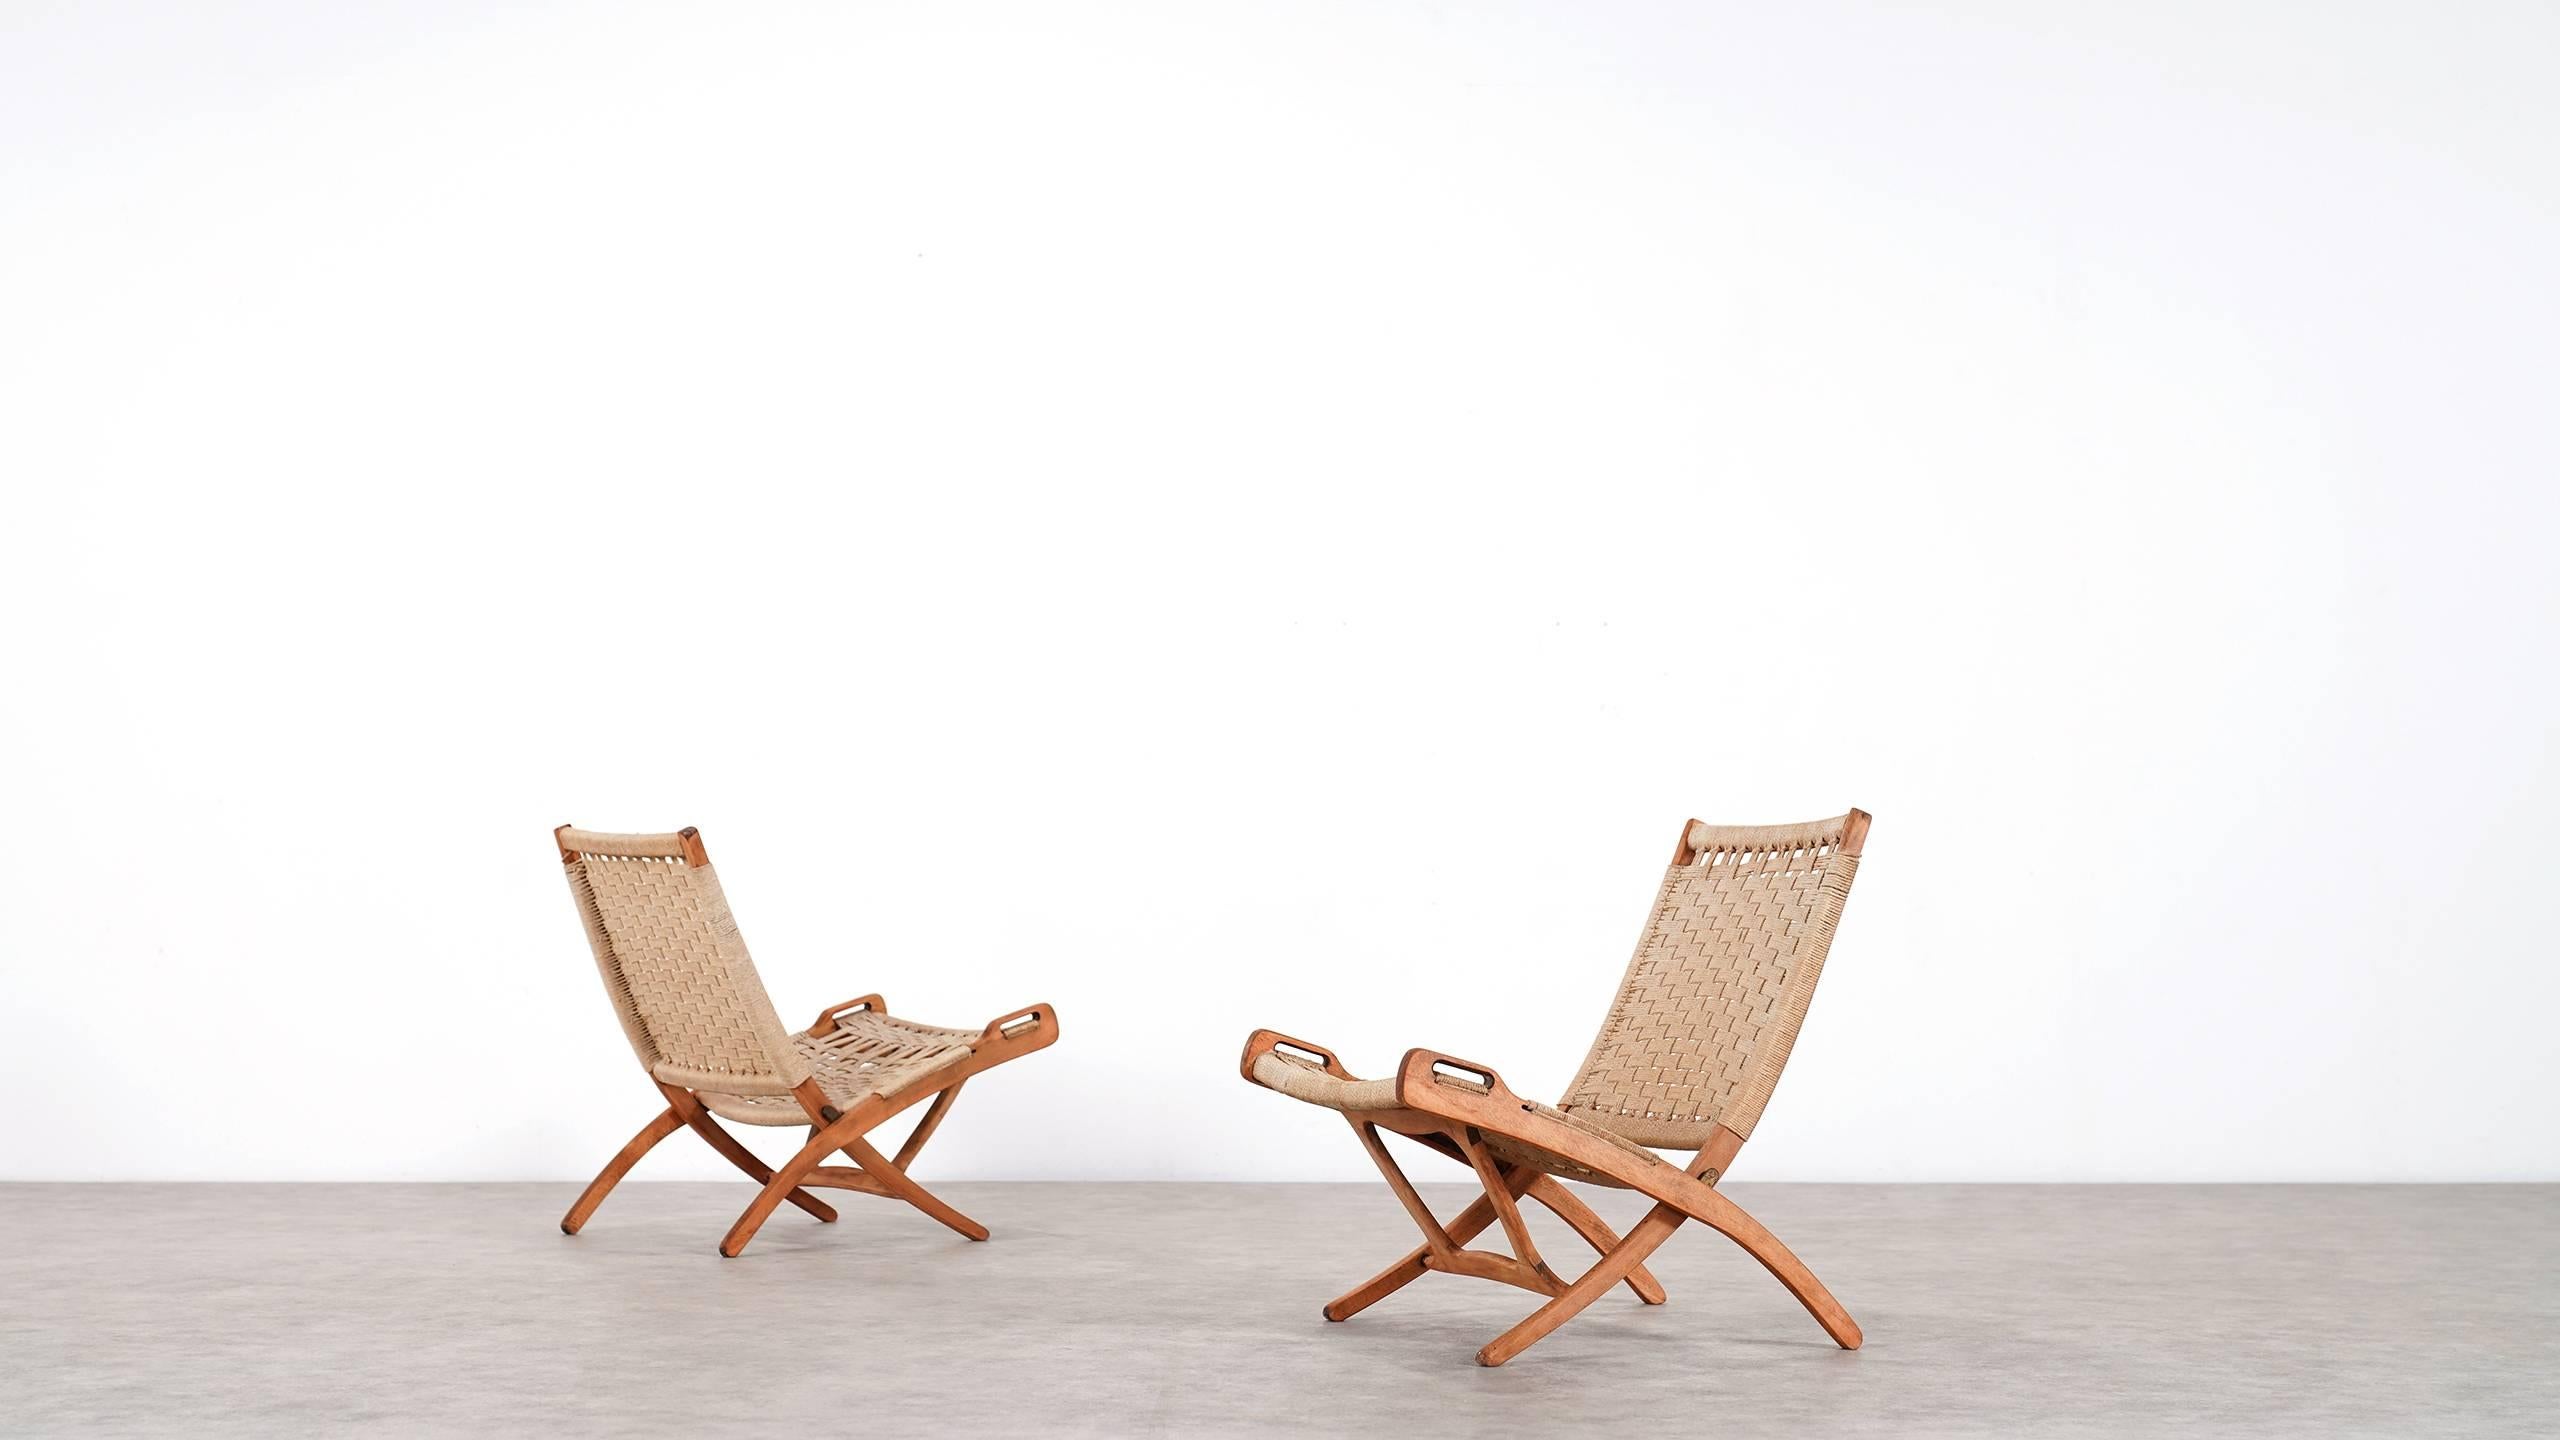 Mid-Century Modern Folding Chair, Hans J. Wegner Style, Wood and Rope Covering, circa 1960